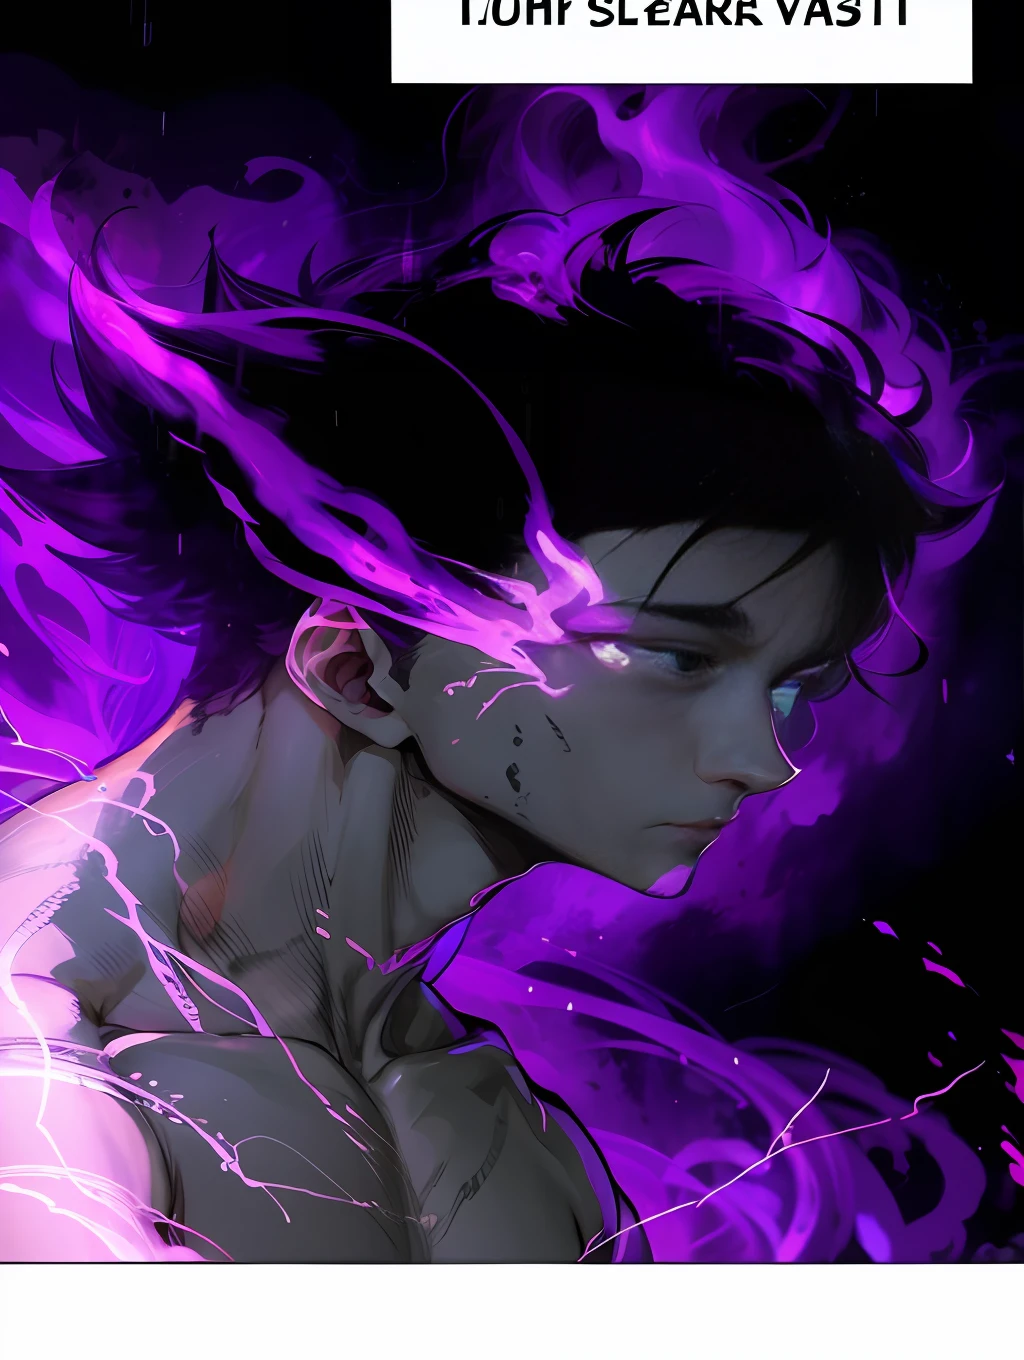 a cartoon picture of a man with purple hair and a purple background, jujutsu kaisen, handsome guy in demon slayer art, trigger anime artstyle, demon slayer artstyle, transforming into his final form, kentaro miura manga art style, epic anime style, hinata hyuga, with glowing purple eyes, profile picture 1024px